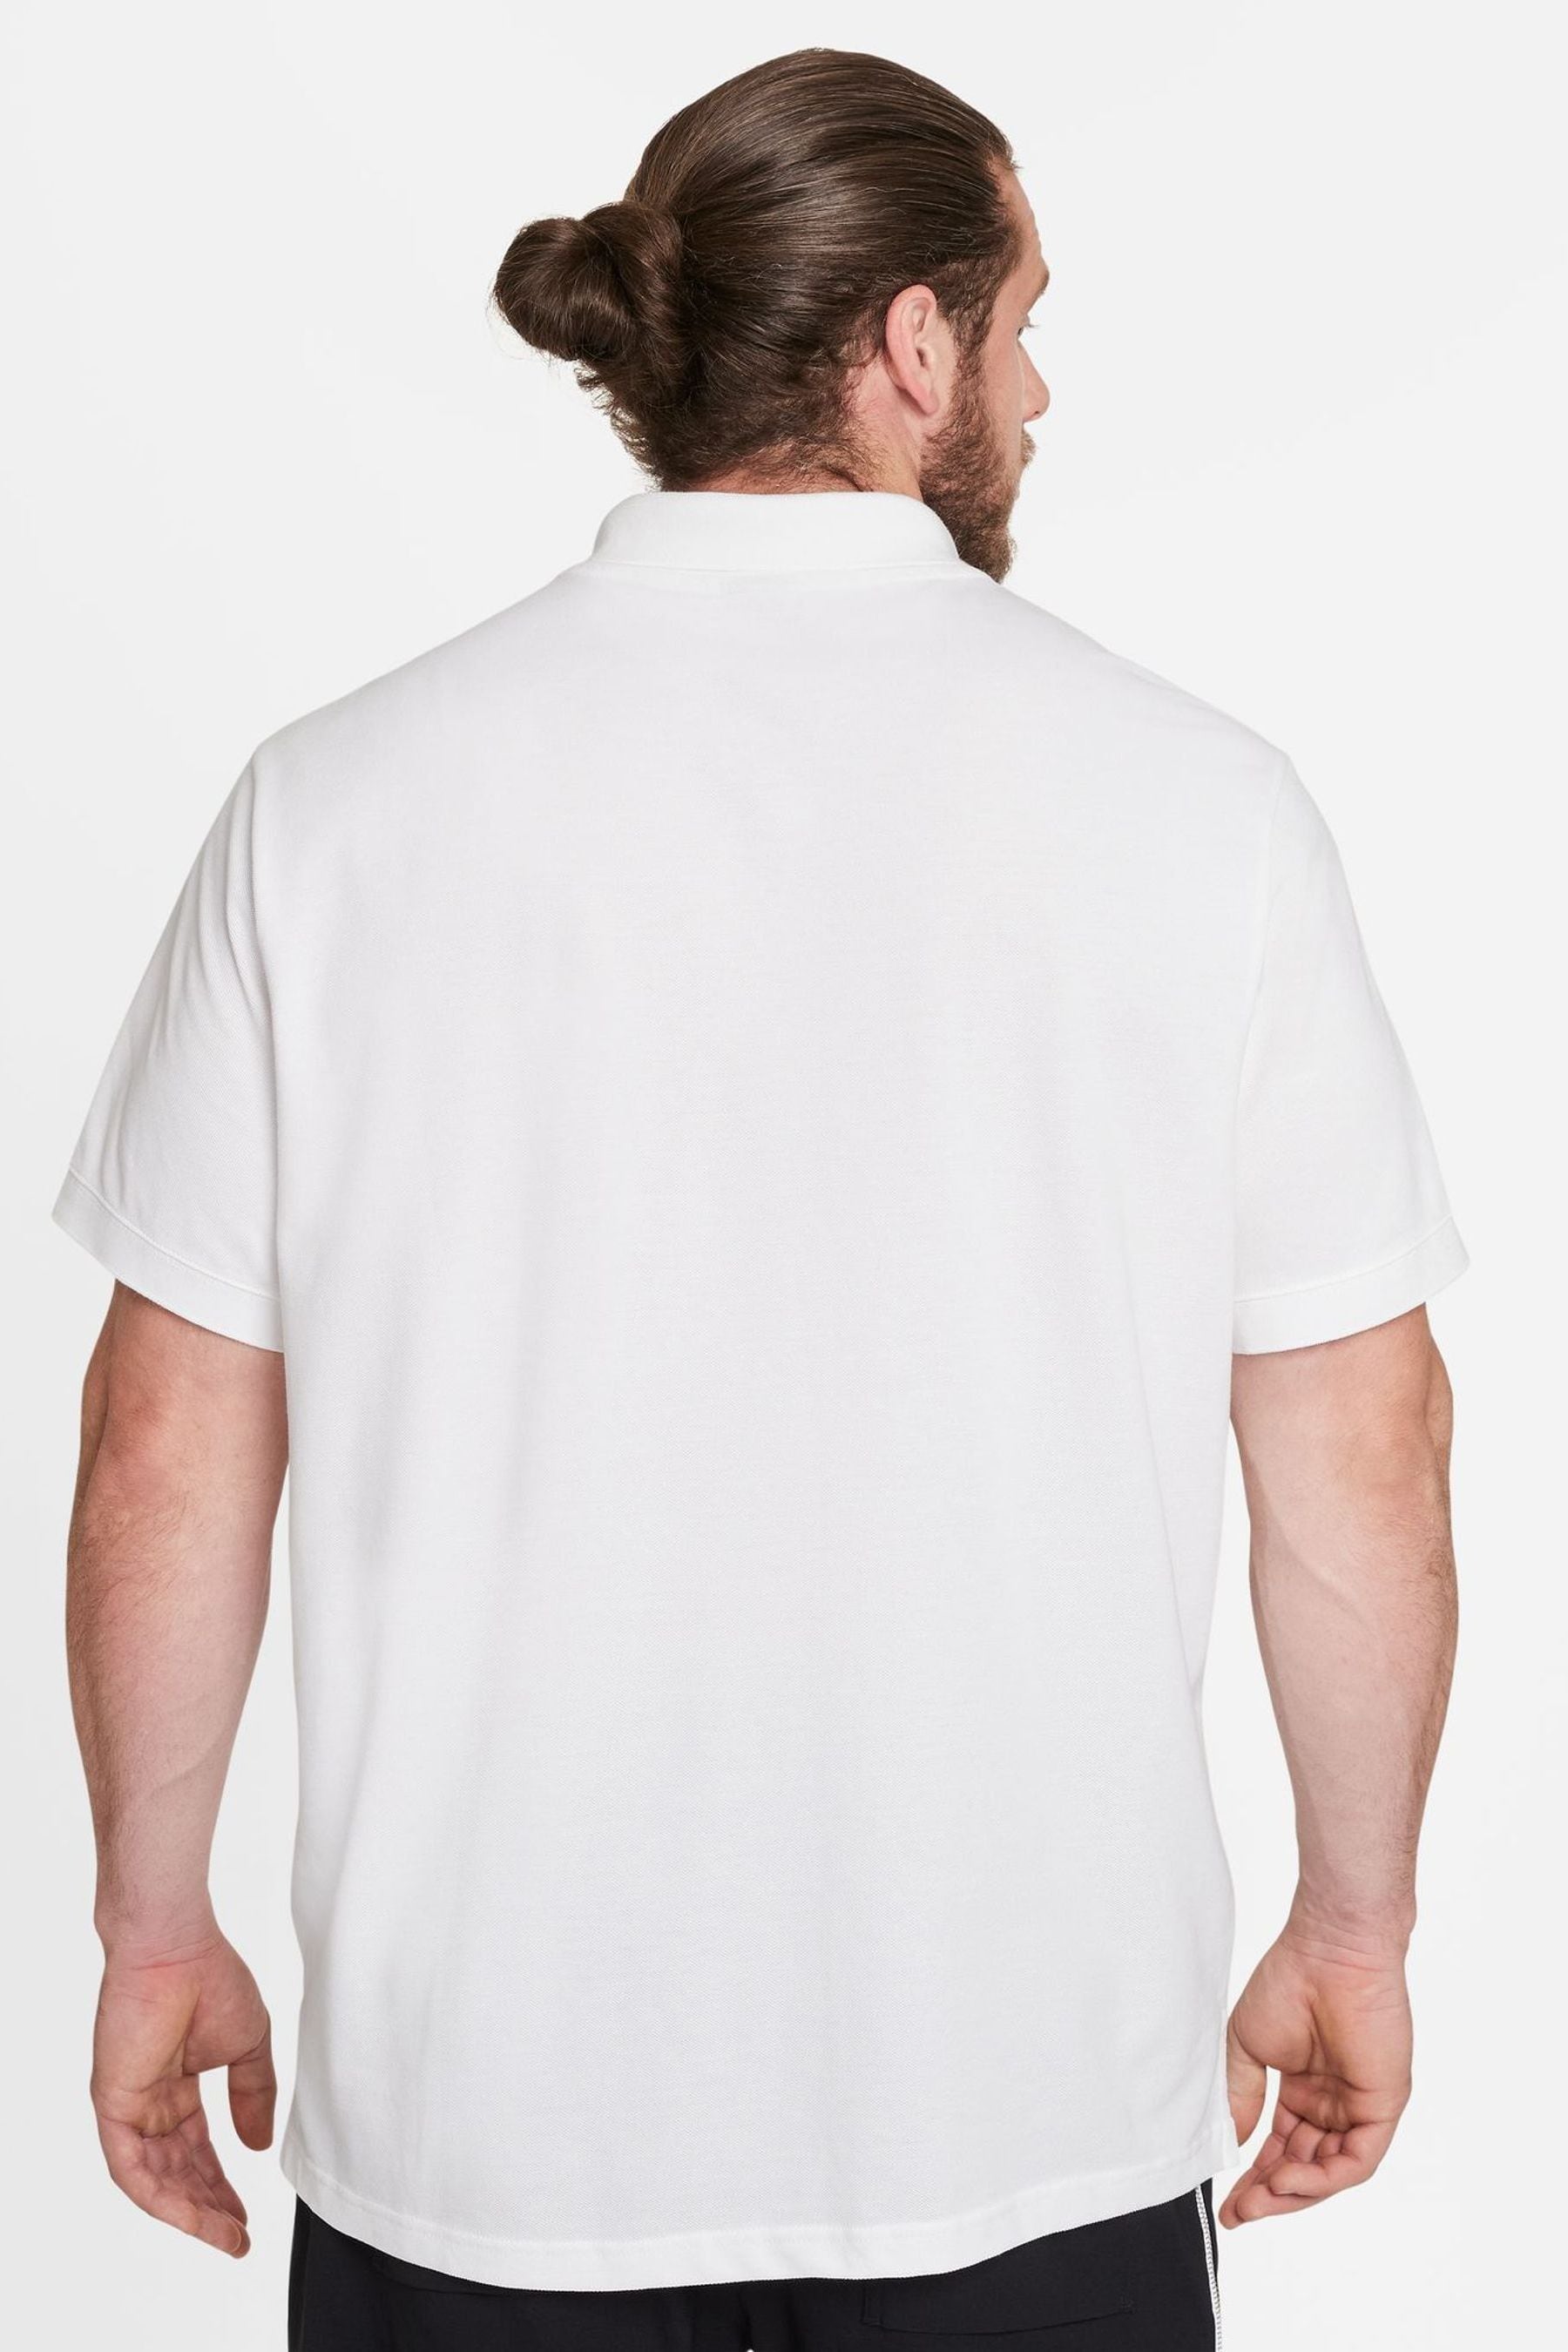 Buy Nike White Sportswear Polo from the Next UK online shop